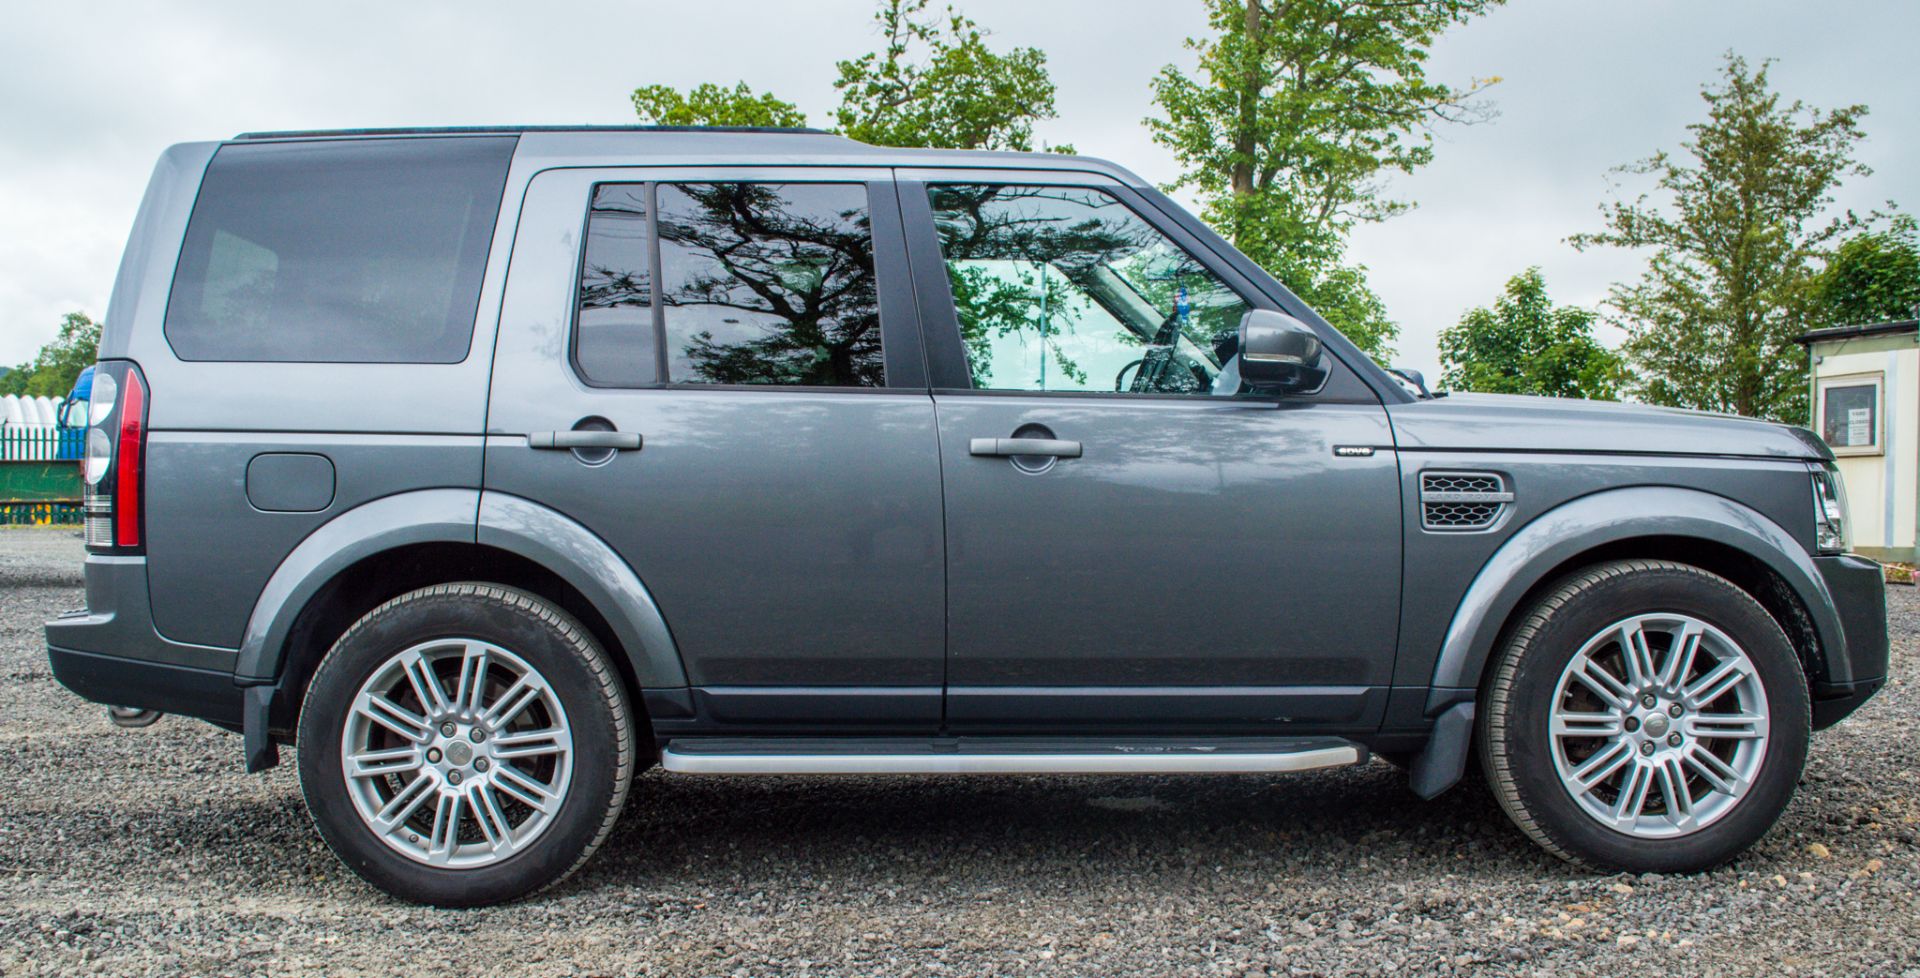 Land Rover Discovery 4 SE 3.0 TDV6 Commercial 4 wheel drive utility vehicle  Reg No: PE 65 NJY  Date - Image 7 of 23